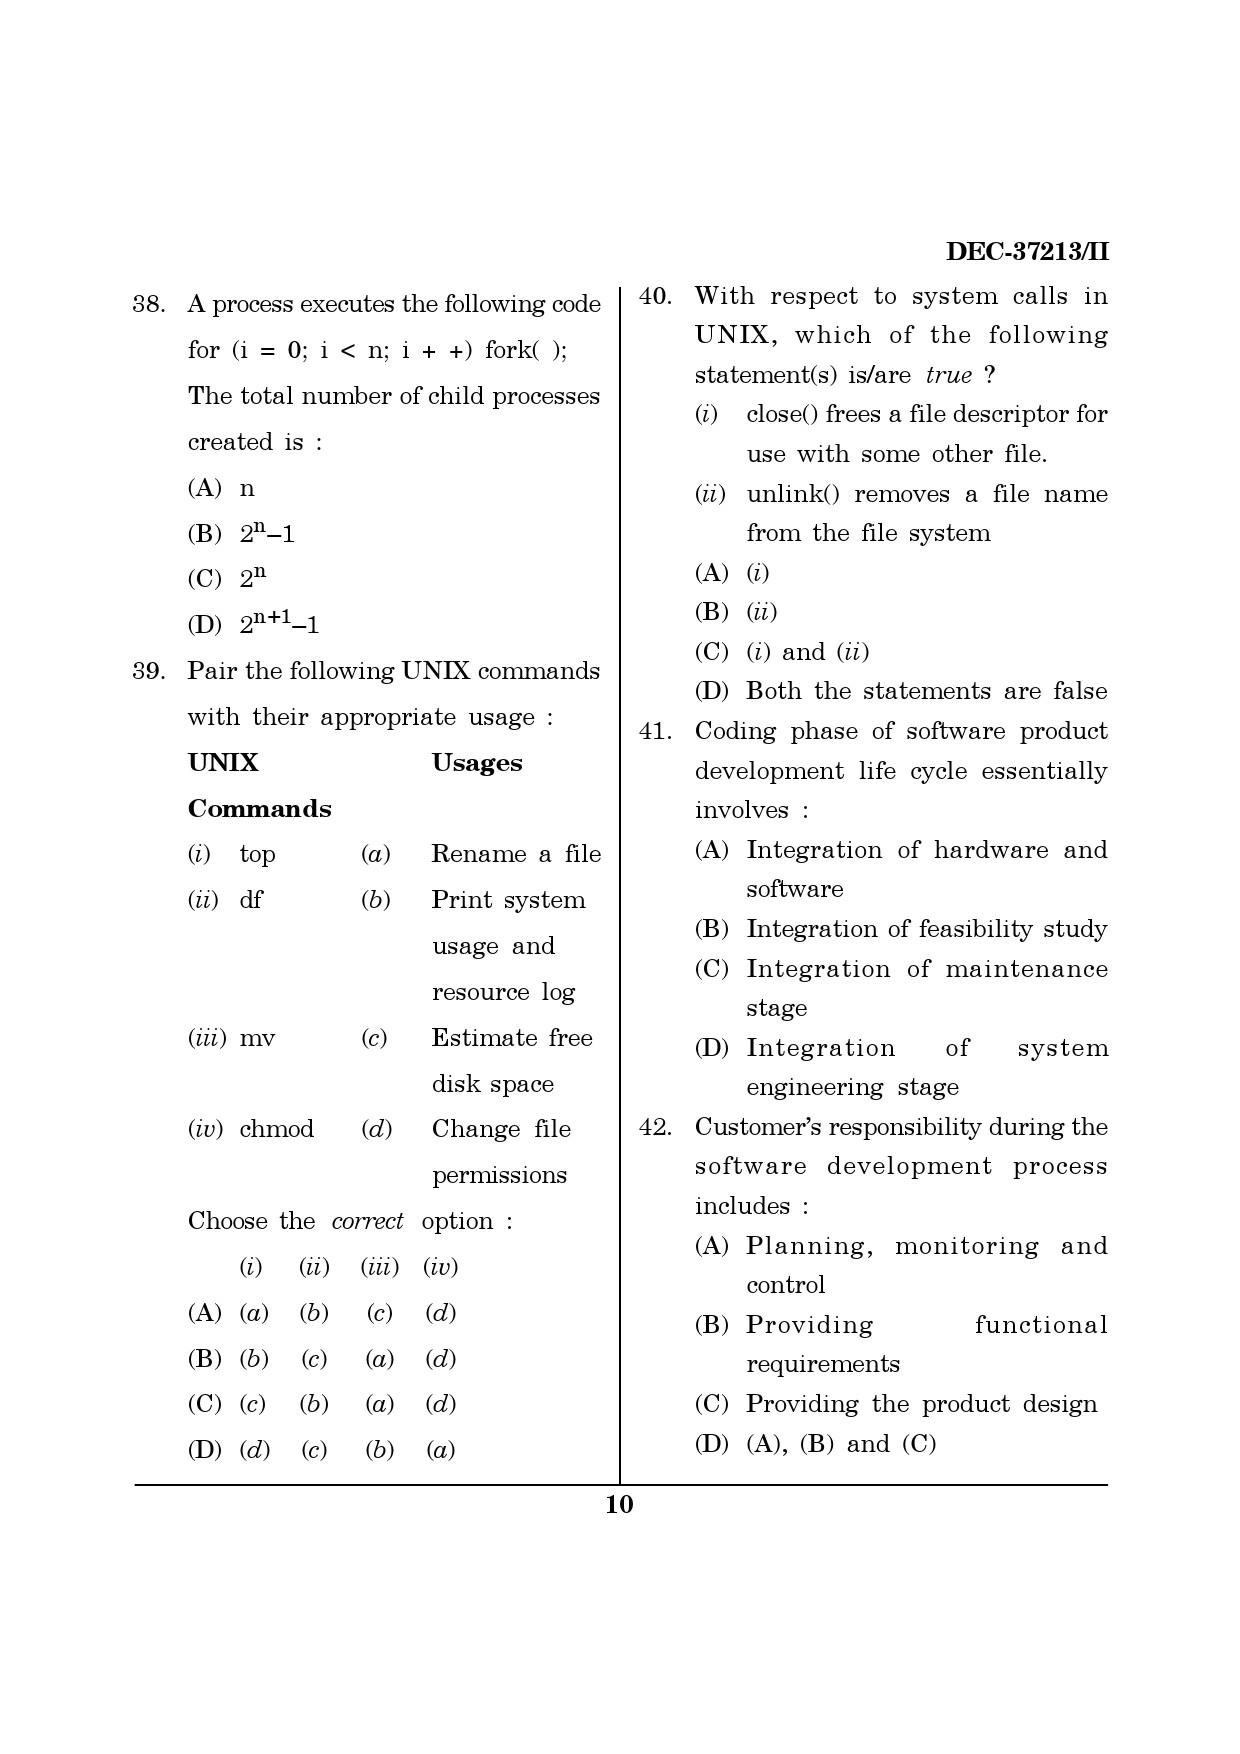 Maharashtra SET Computer Science and Application Question Paper II December 2013 9